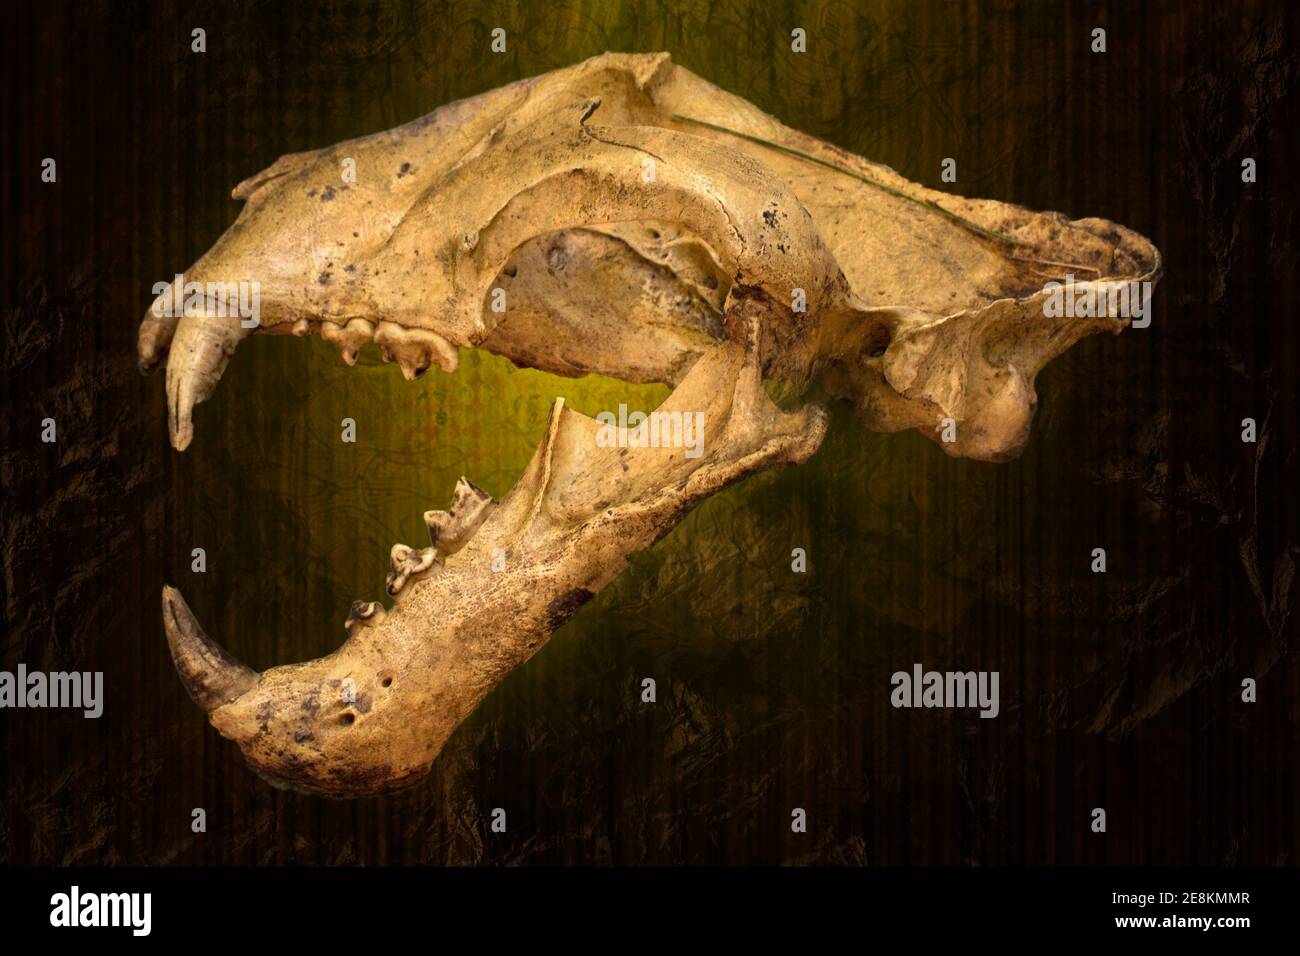 A skull of a Malayan Tiger set against a textured background. Stock Photo